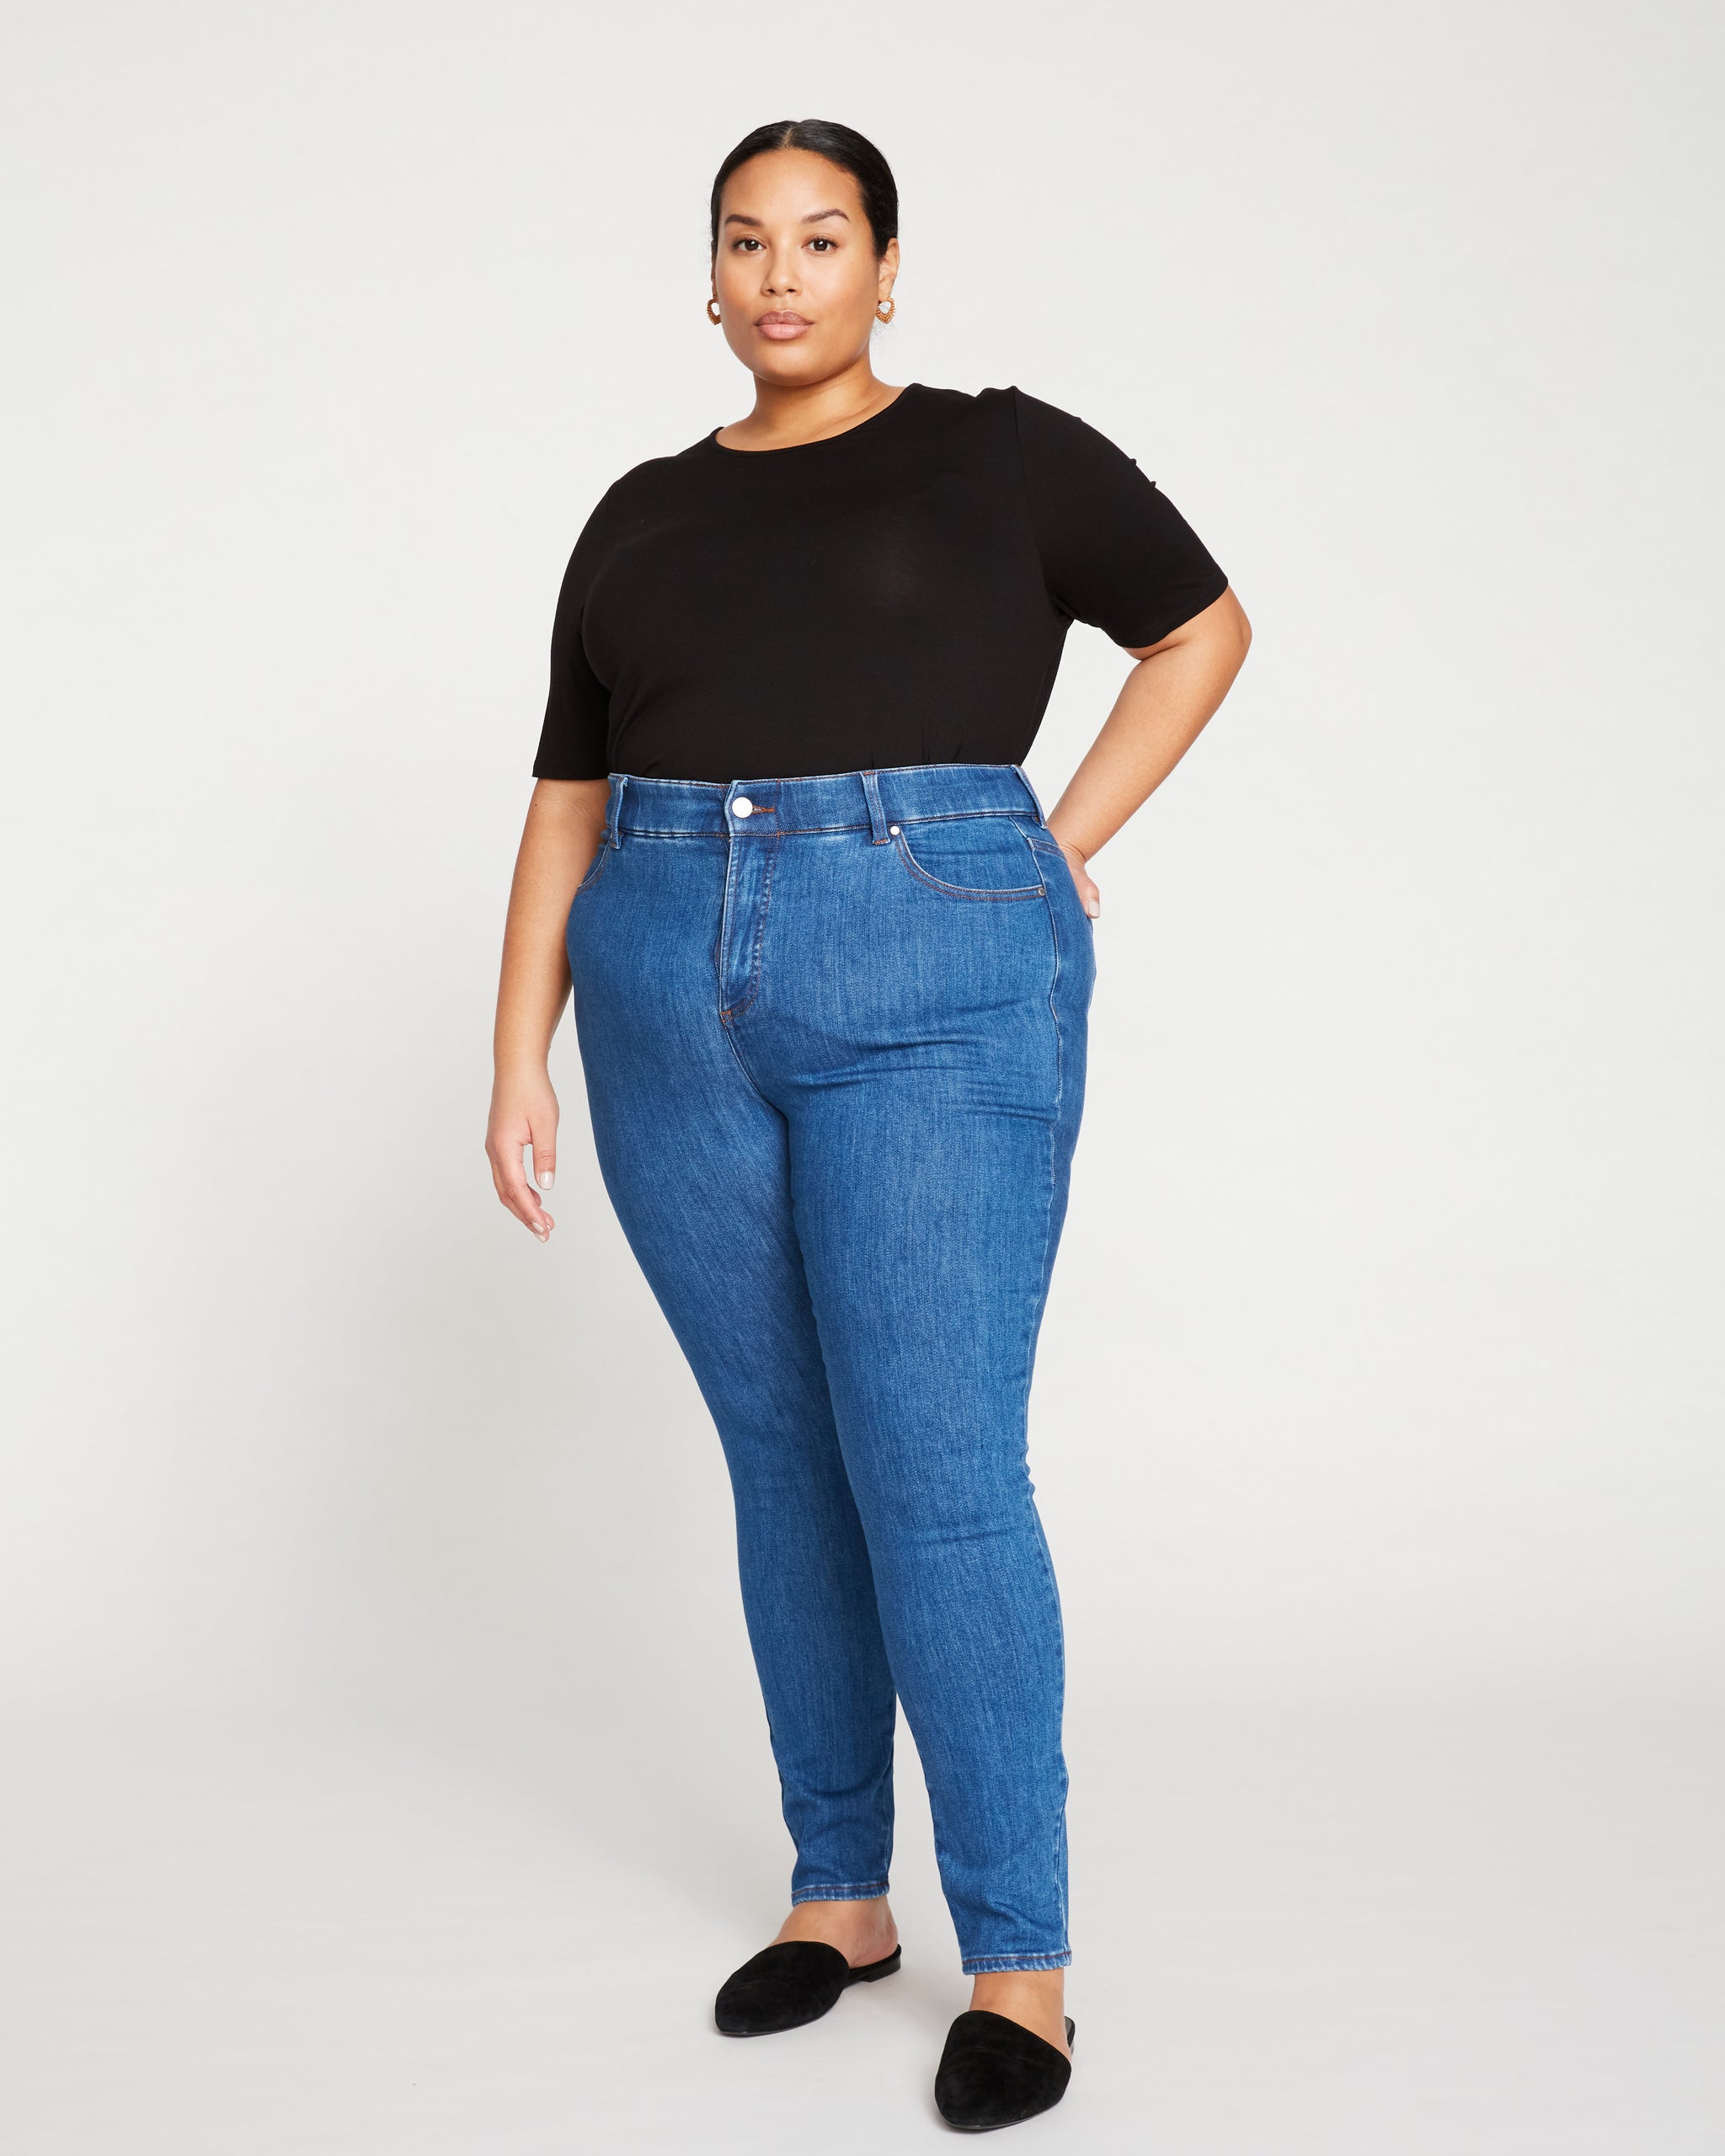 The Classic Skinny High Waist Jeans